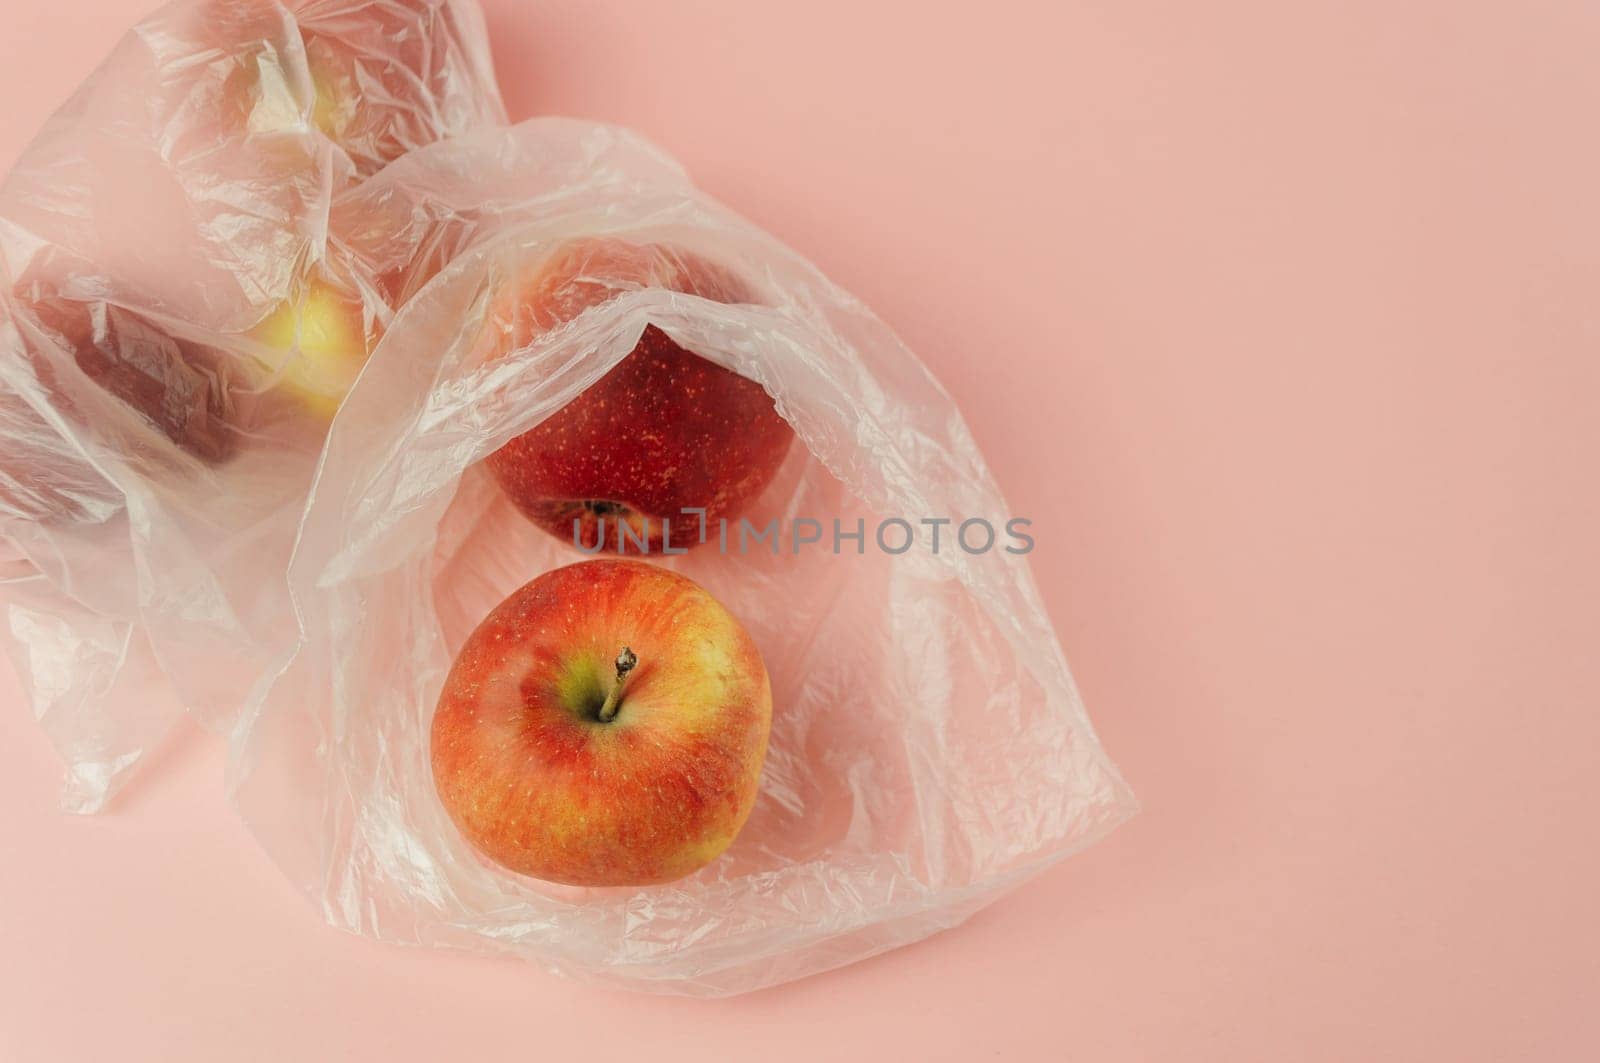 A plastic bag with a red apple inside. The bag is placed on a pink background. Concept of wastefulness and environmental concern, as the plastic bag is used to hold the apple, which is a natural